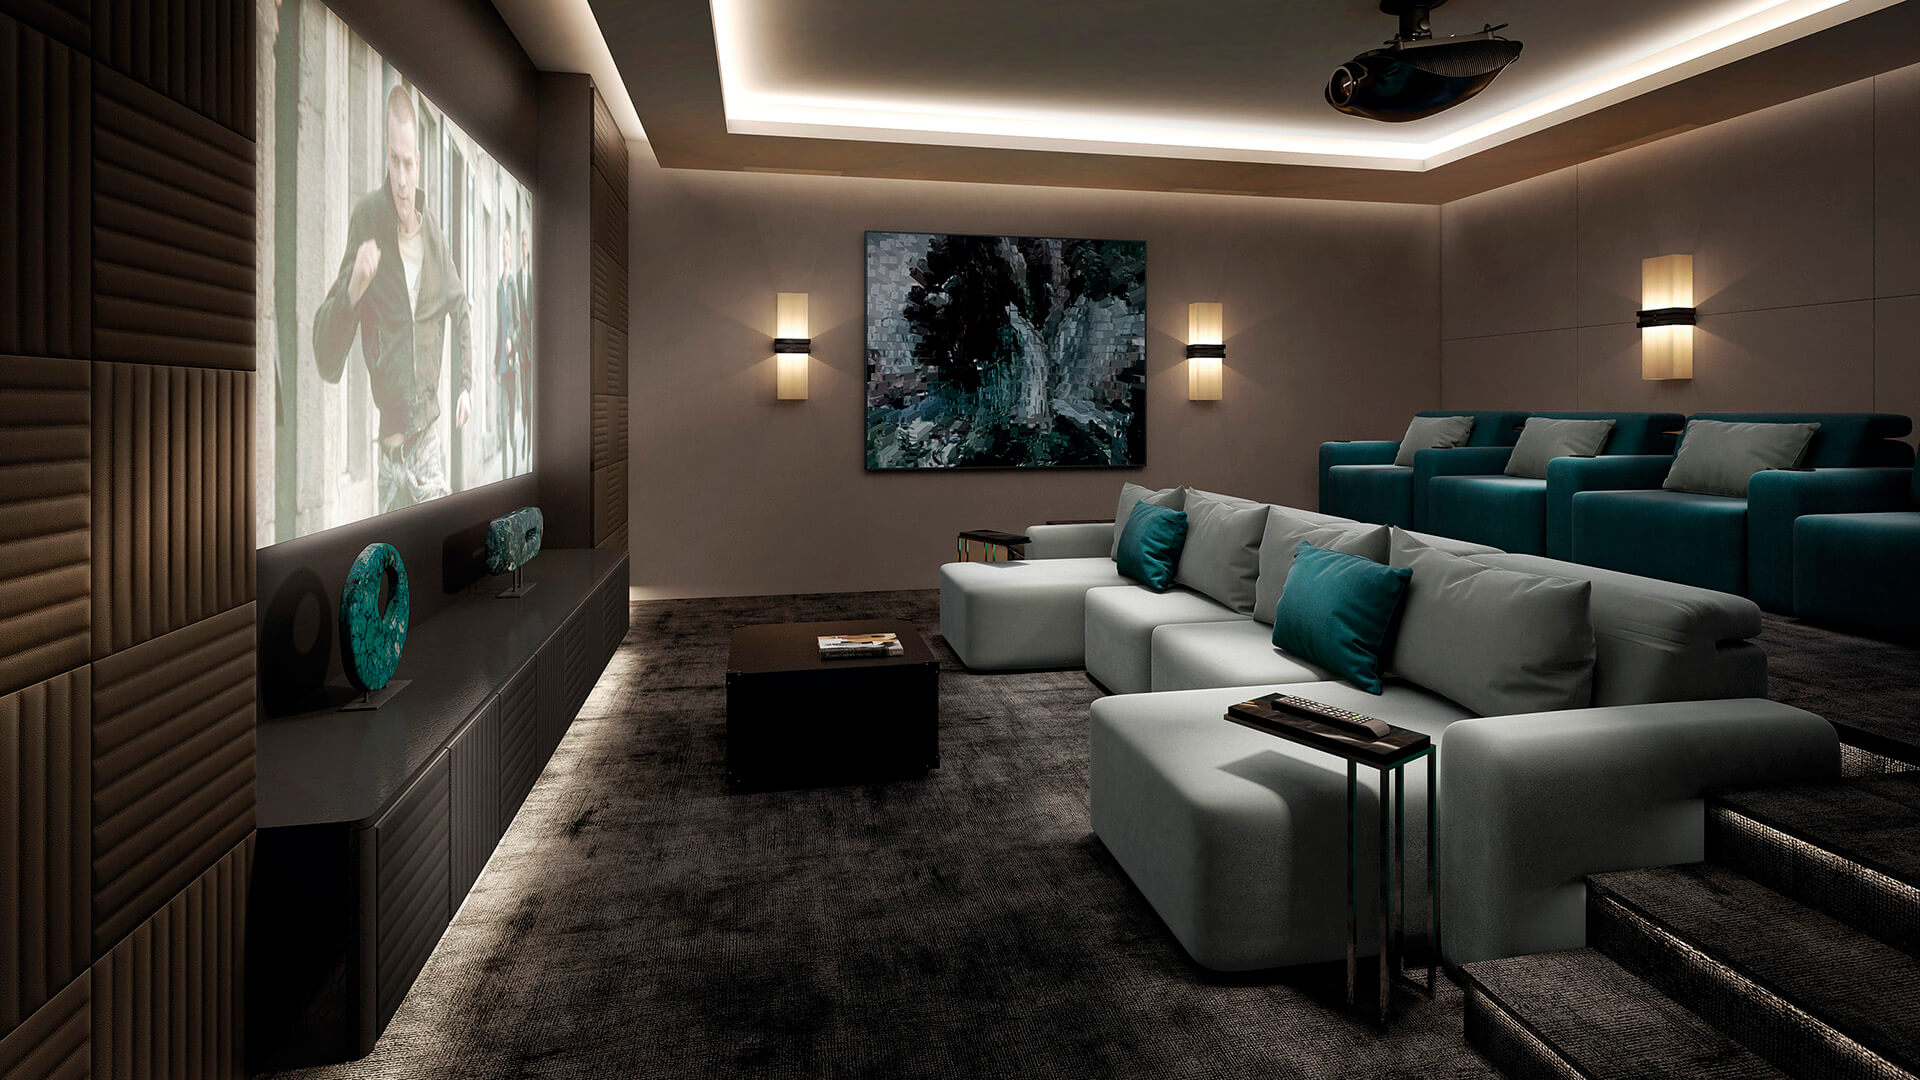 Luxury home theater room with comfortable reclining sofas and chaise longues with the option of customisation and bespoke manufacture.